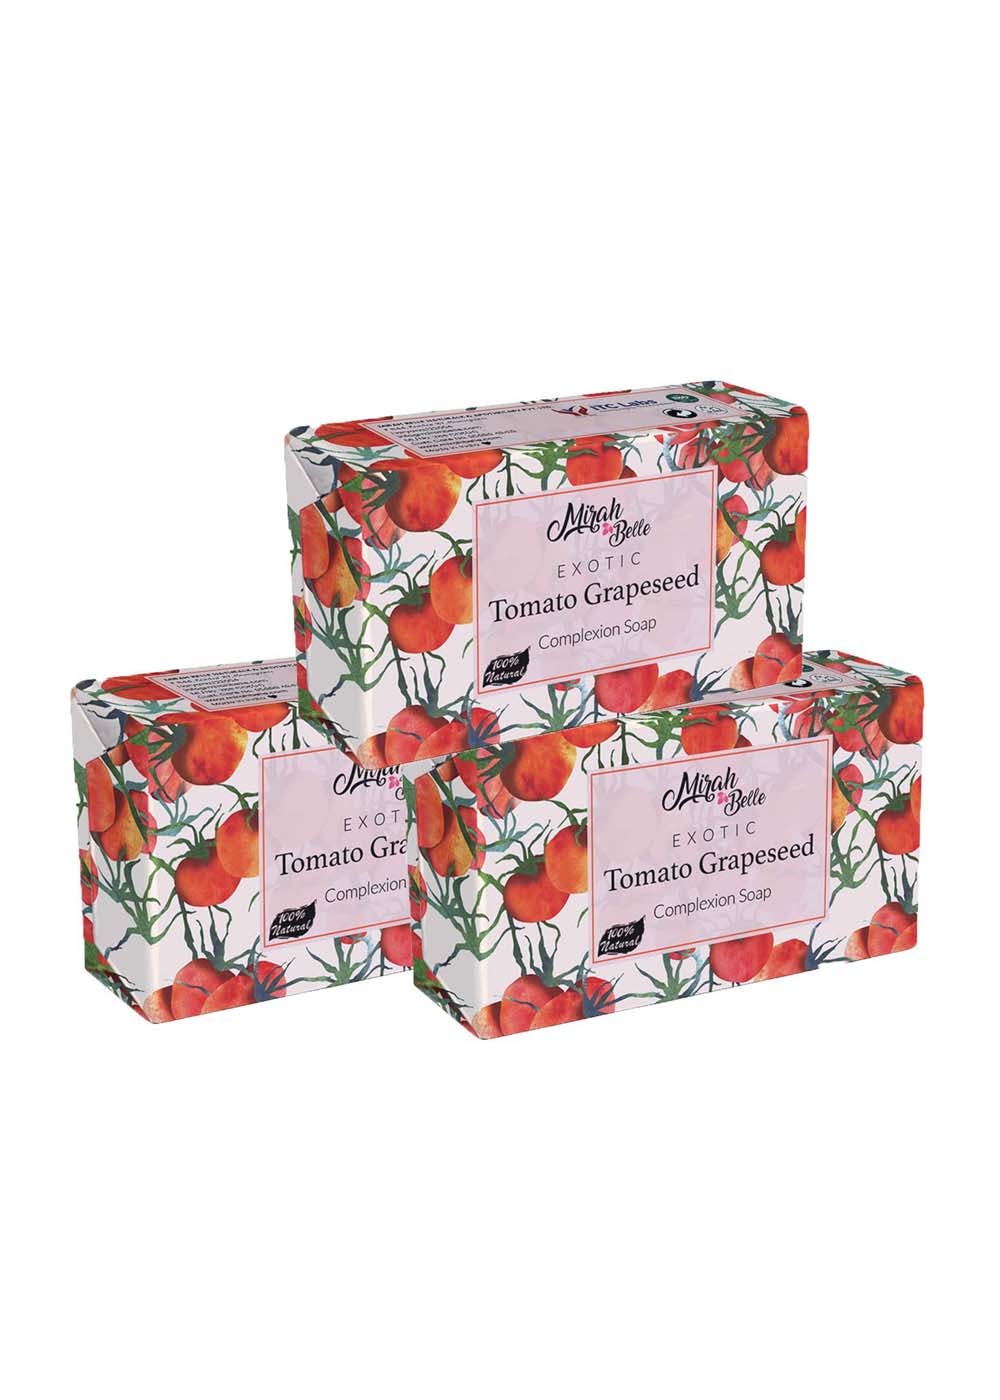 Tomato Grapeseed Soap - Pack of 3 (75gm each)